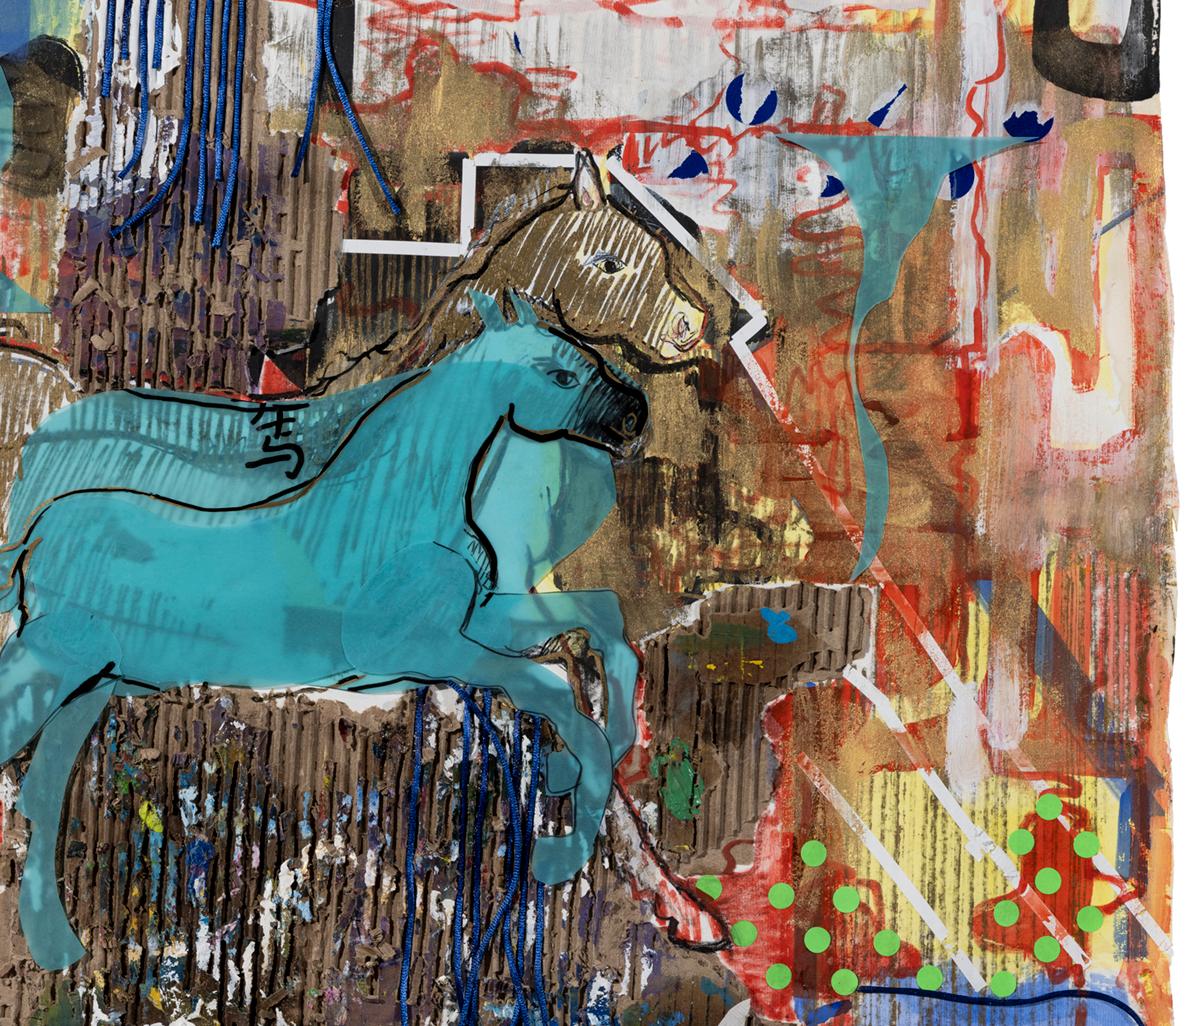 Mixed Media Painting
Title: Series Beasts of Burden No. 9
Dimension: 82 x 61 cm 
Material: Mixed Media 
Date: 2022

Artist Biography 
Zhang Chunyang was born in 1975 in Changchun, Jilin. She earned her B.F.A at Jilin University of Arts in 1999, and